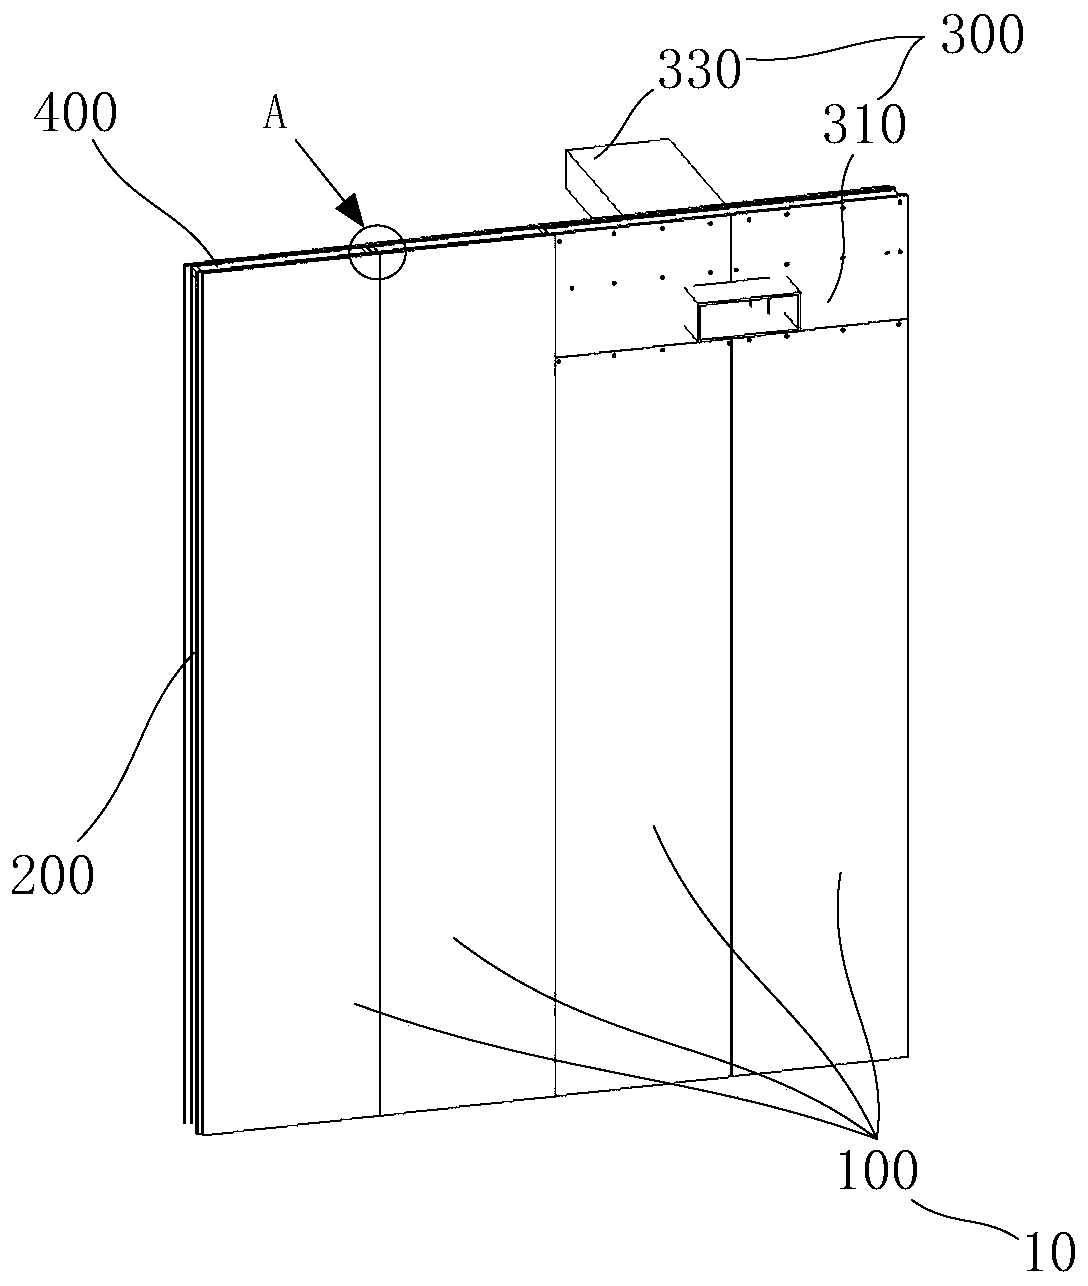 Fabricated wall crossed by air duct and mounting method of fabricated wall